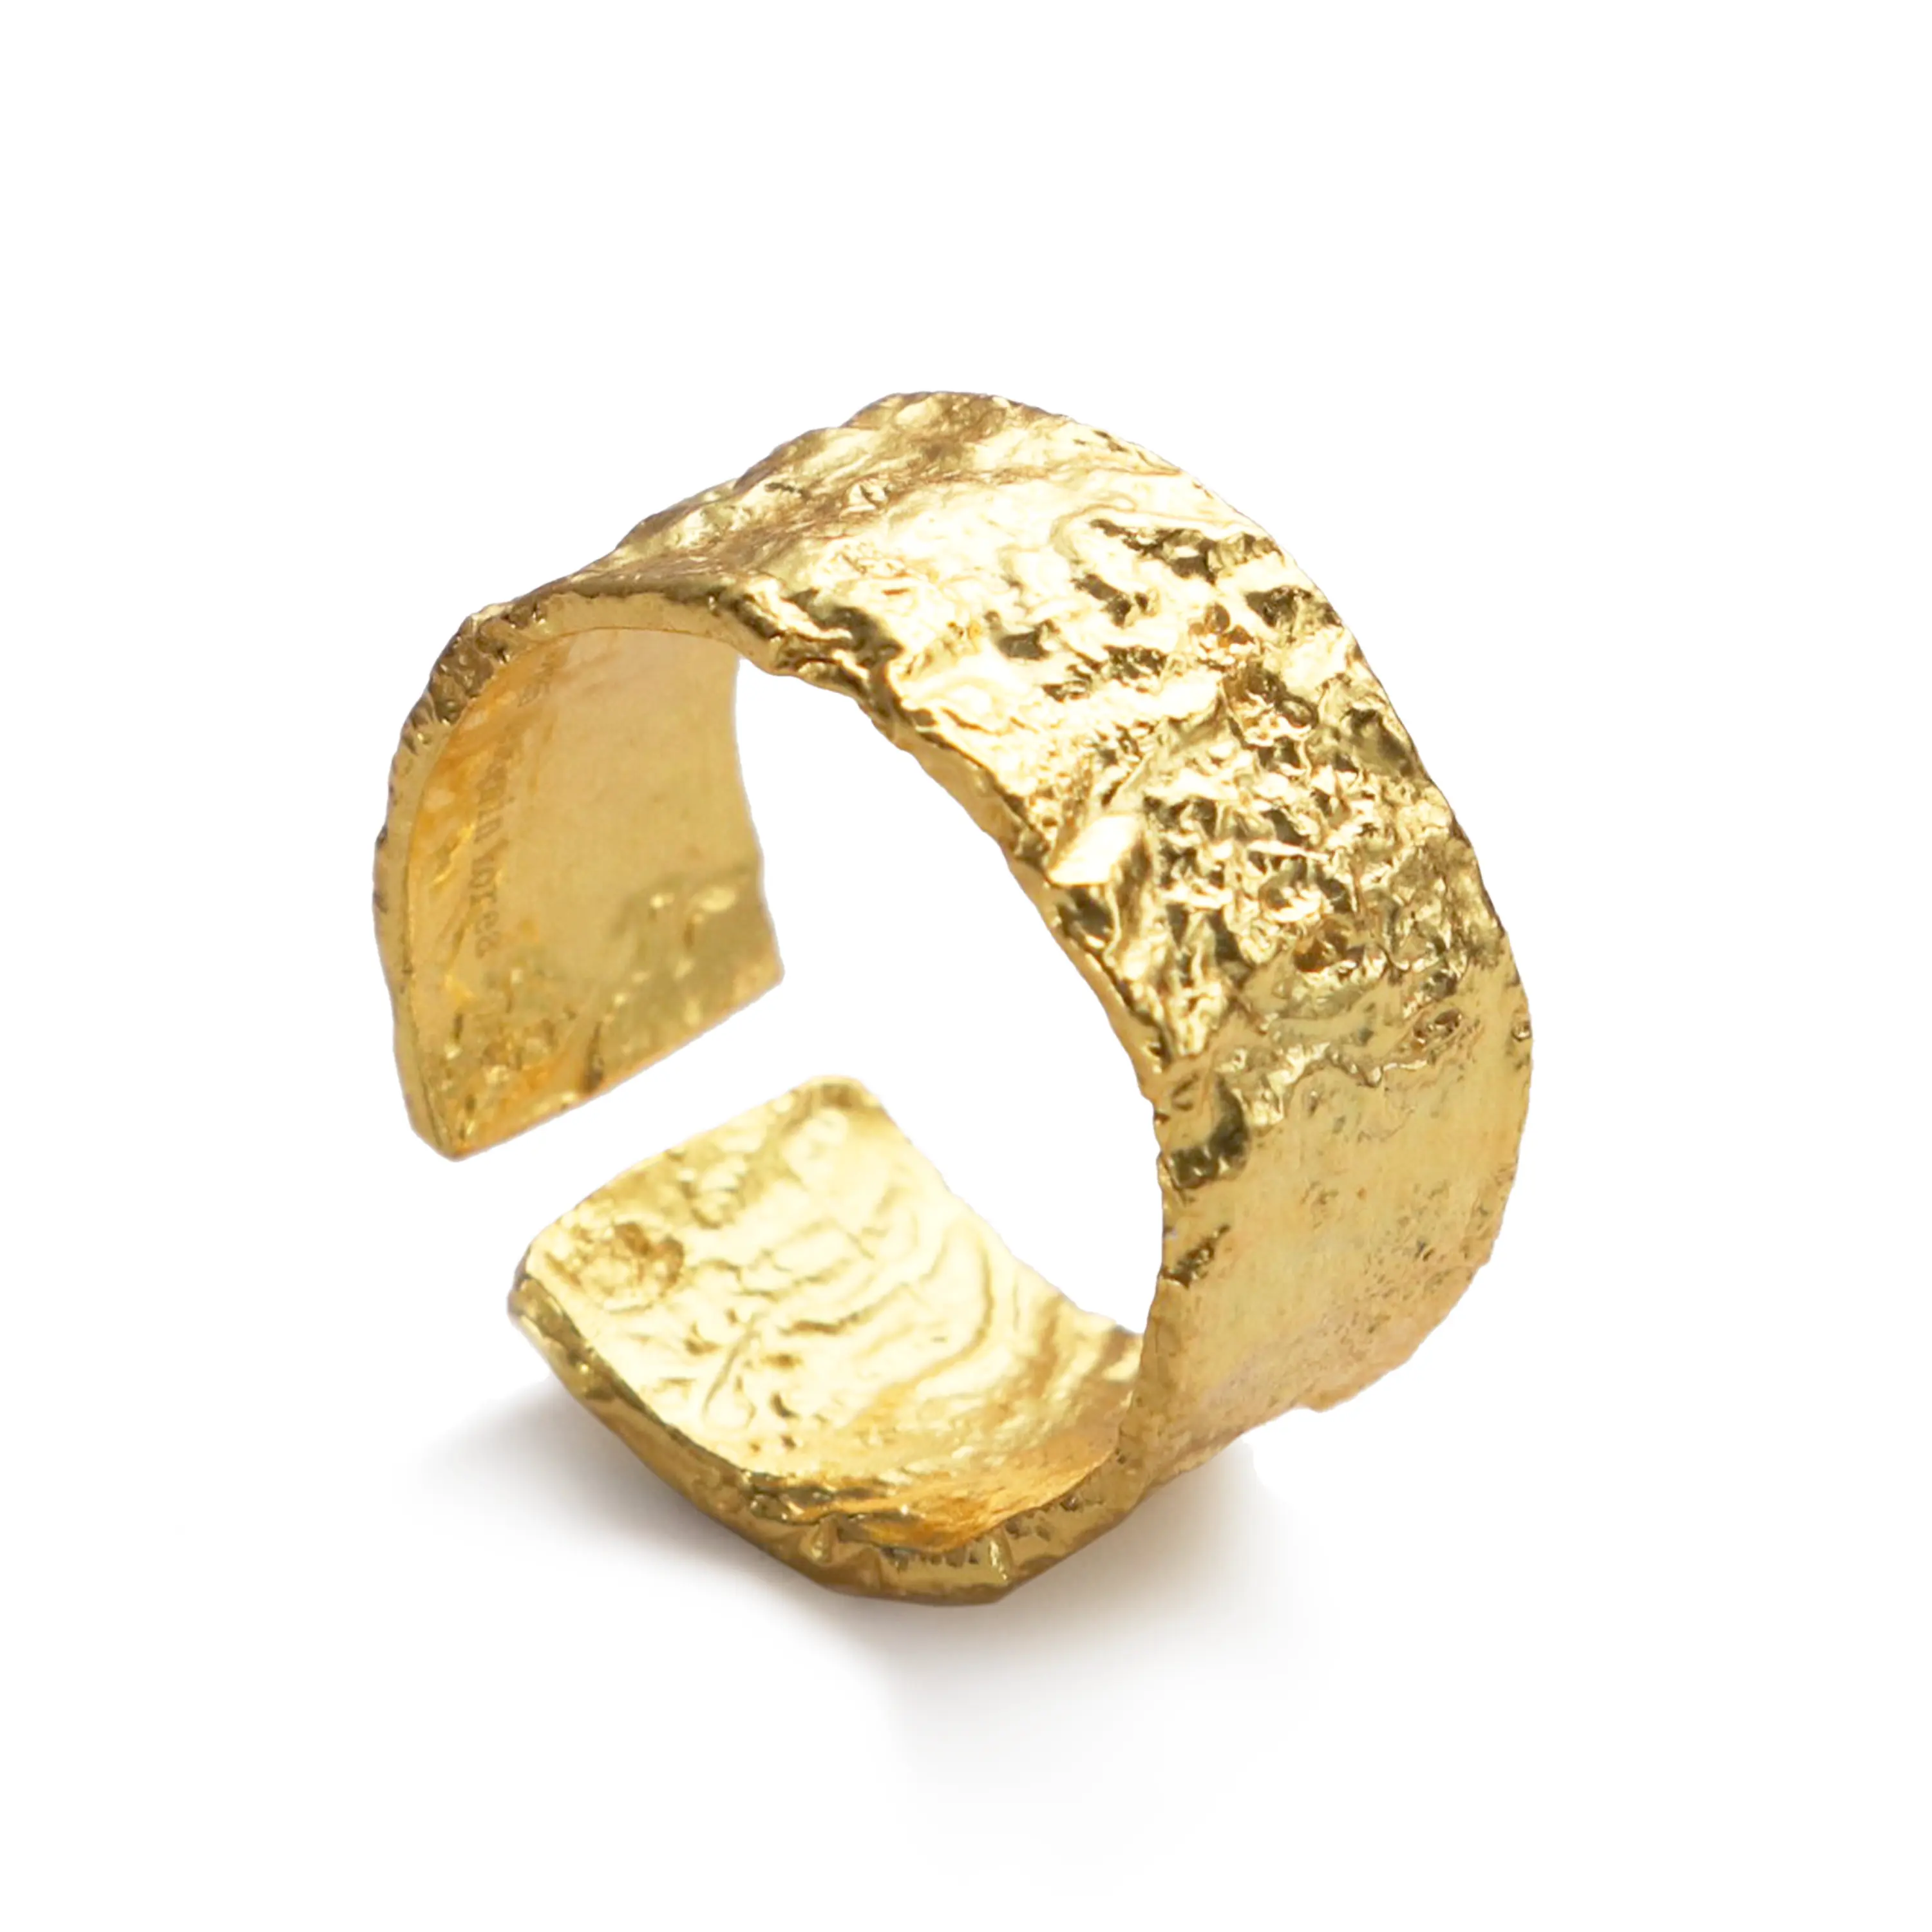 Chris Apri In stock 925 sterling silver gold plated hammered bumpy organic texture band adjustable rings